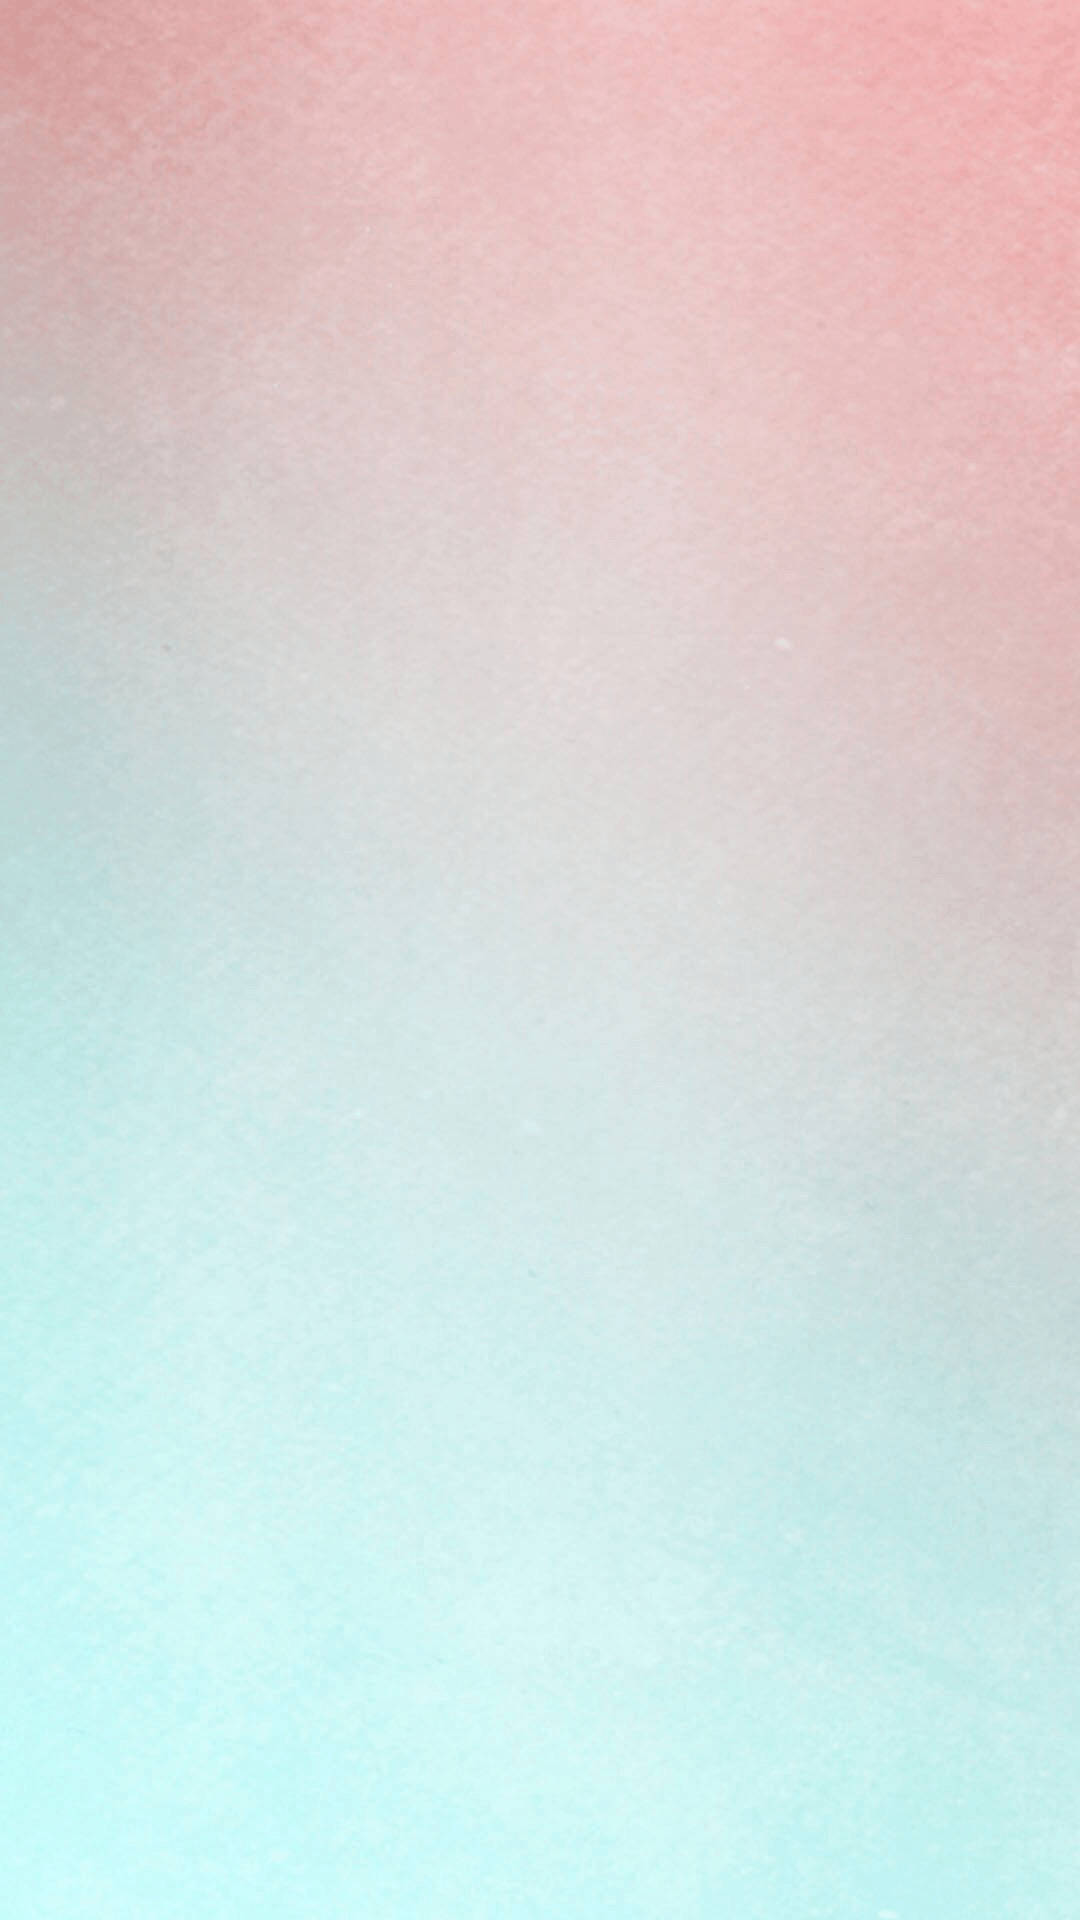 Enjoy The Perfect Pastel Pink And Blue Hues. Background